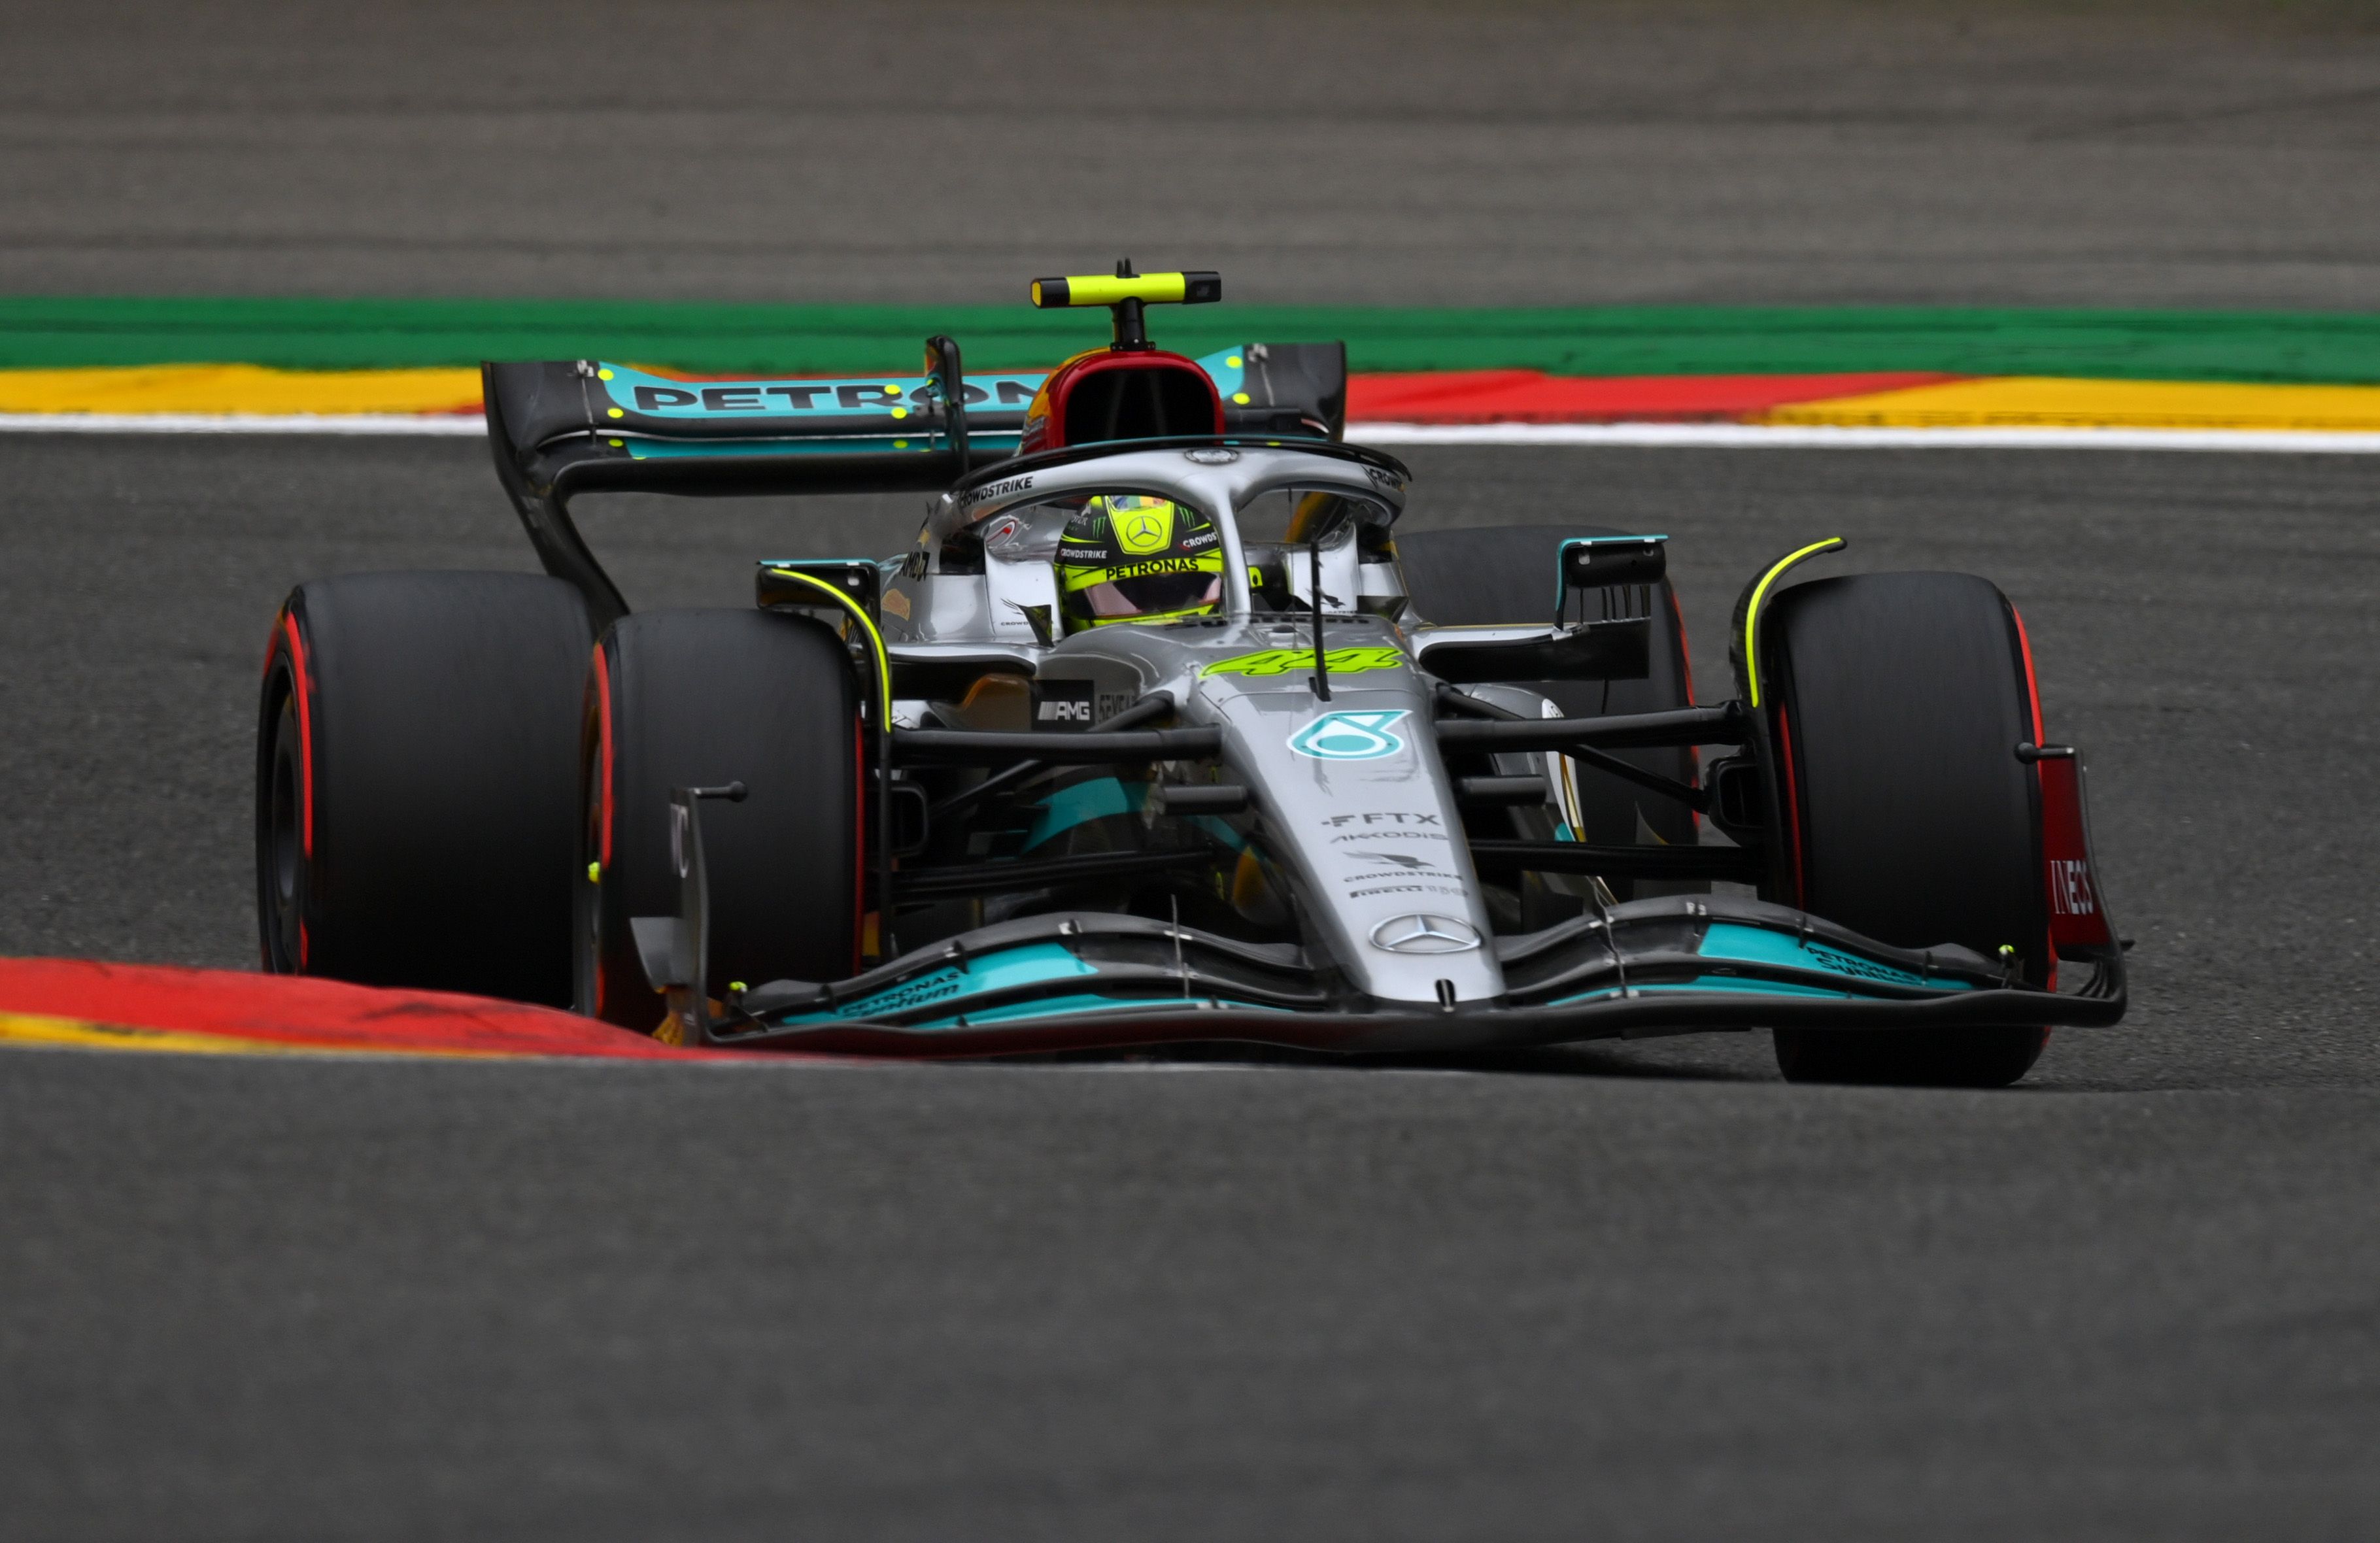 Lewis Hamilton drives the Mercedes in Spa